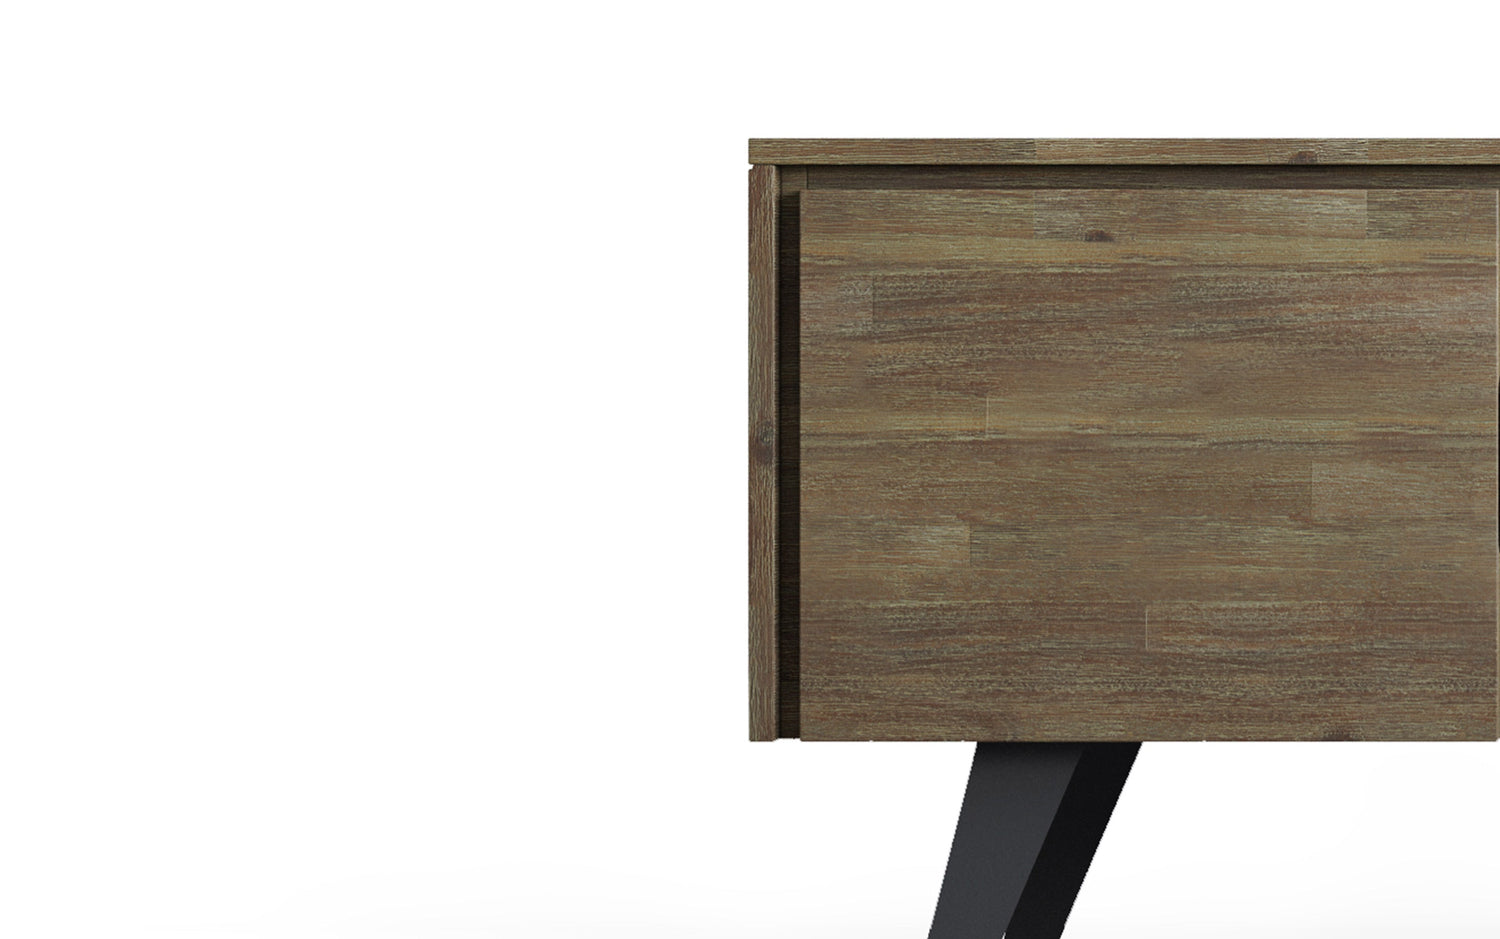 Distressed Grey Acacia | Lowry Solid Acacia Wood Wide TV Media Stand For TVs up to 70 Inches